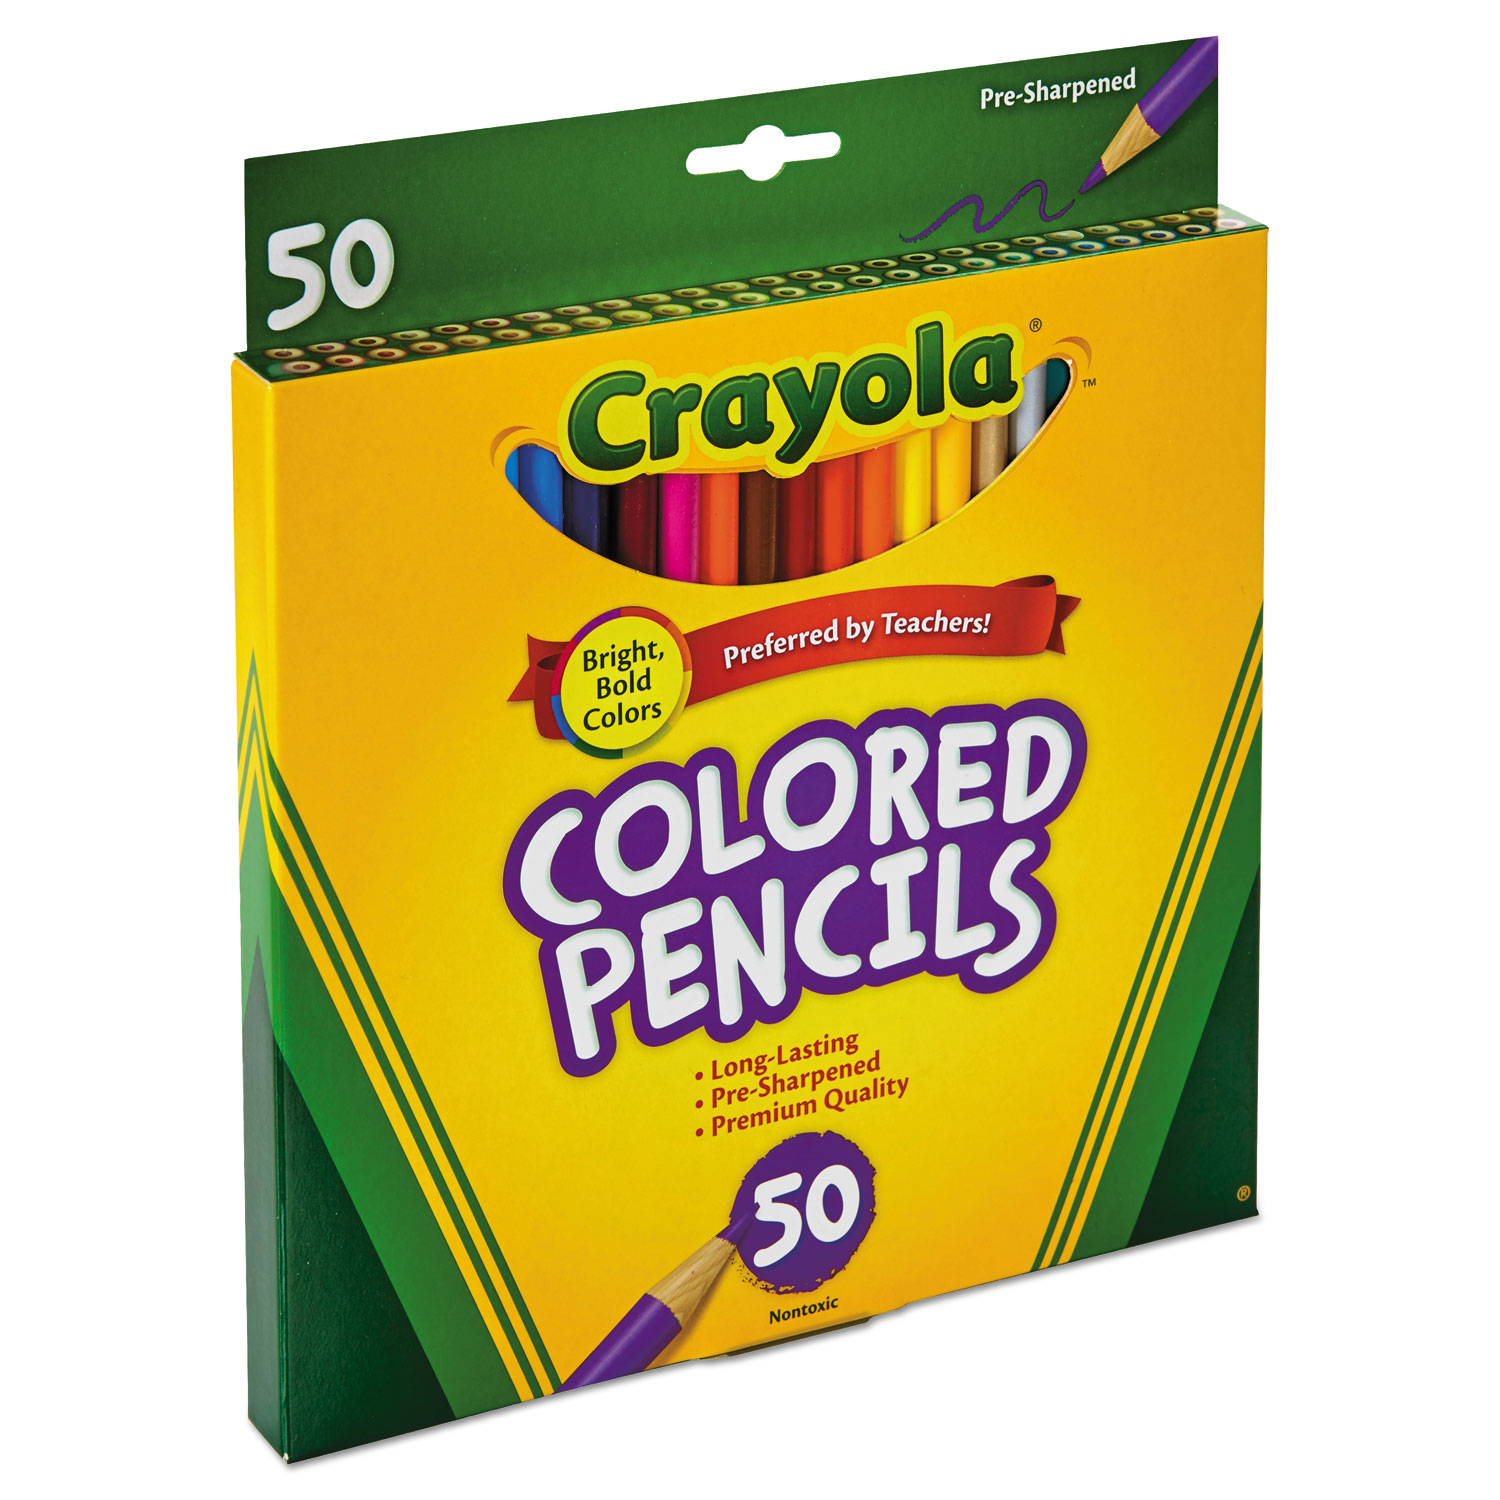 Crayola 50ct Long Colored Pencils (68-4050) 6 Pack